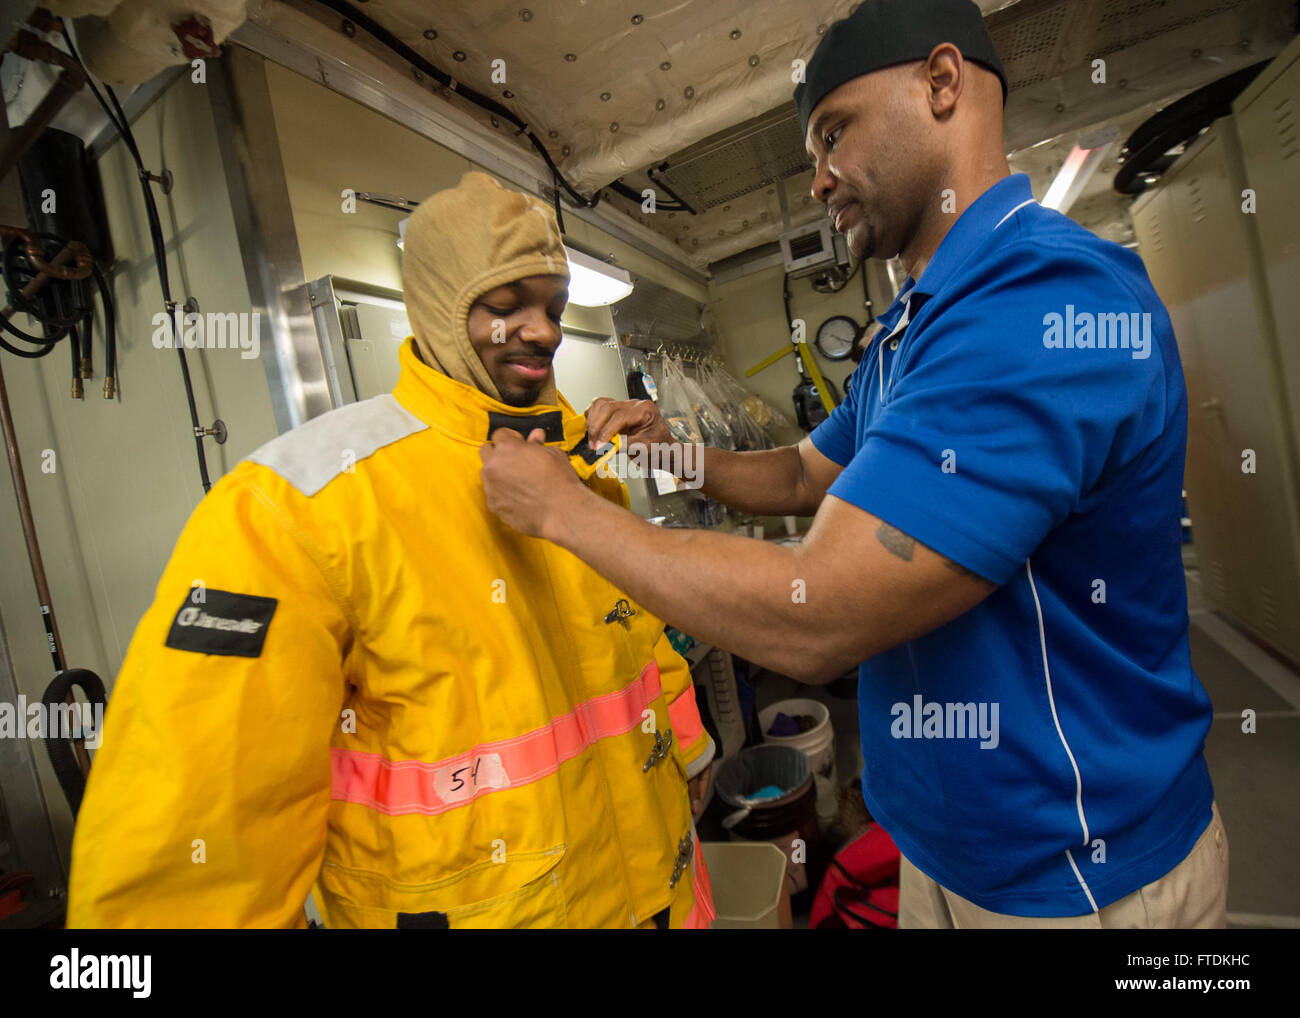 160125-N-QF605-008 ATLANTIC OCEAN (Jan. 25, 2016) - Cook Baker Irvine Cummings helps Able Bodied Seaman David Leader don his personal protective gear during a fire drill aboard USNS Spearhead (T-EPF 1) Jan. 25, 2016. The Military Sealift Command expeditionary fast transport vessel USNS Spearhead is on a scheduled deployment to the U.S. 6th Fleet area of operations to support the international collaborative capacity-building program Africa Partnership Station. (U.S. Navy photo by Mass Communication Specialist 1st Class Amanda Dunford/Released) Stock Photo